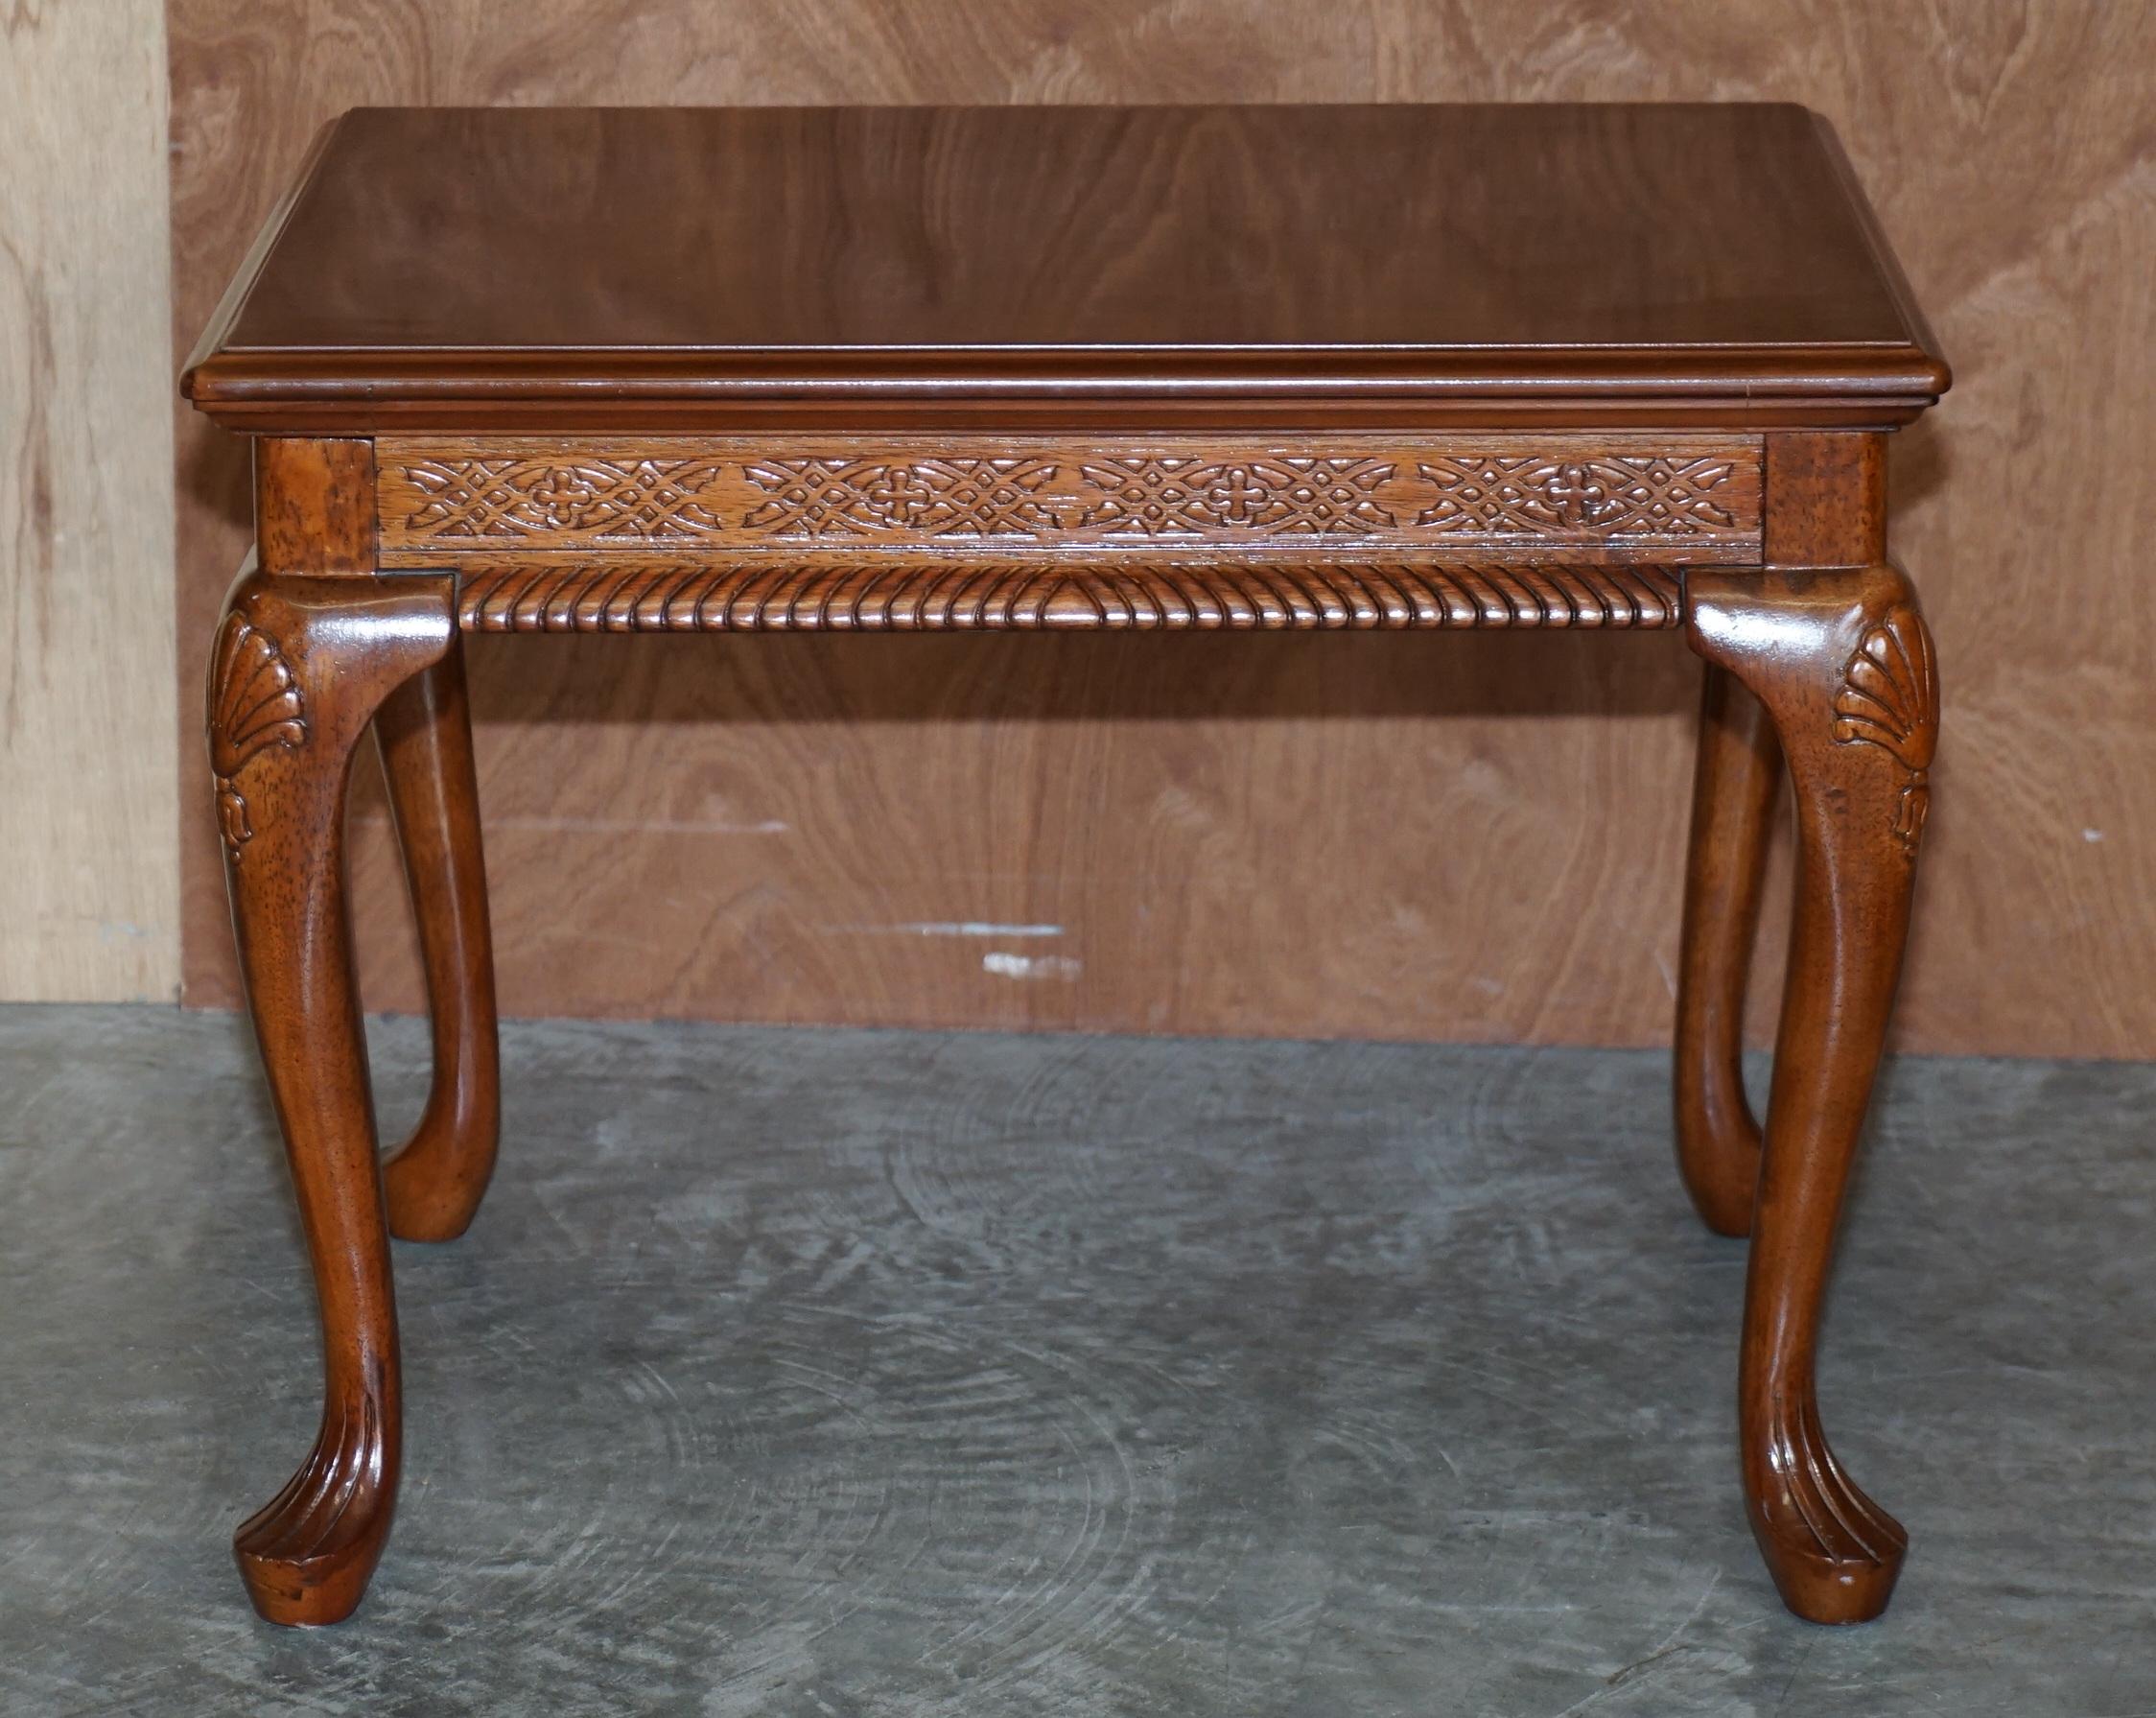 We are delighted to offer for sale this lovely vintage Georgian Irish walnut coffee table

A very well made and decorative table, it looks good in any setting, the legs are carved in the Georgian Irish manor with acanthus leaves to the top and